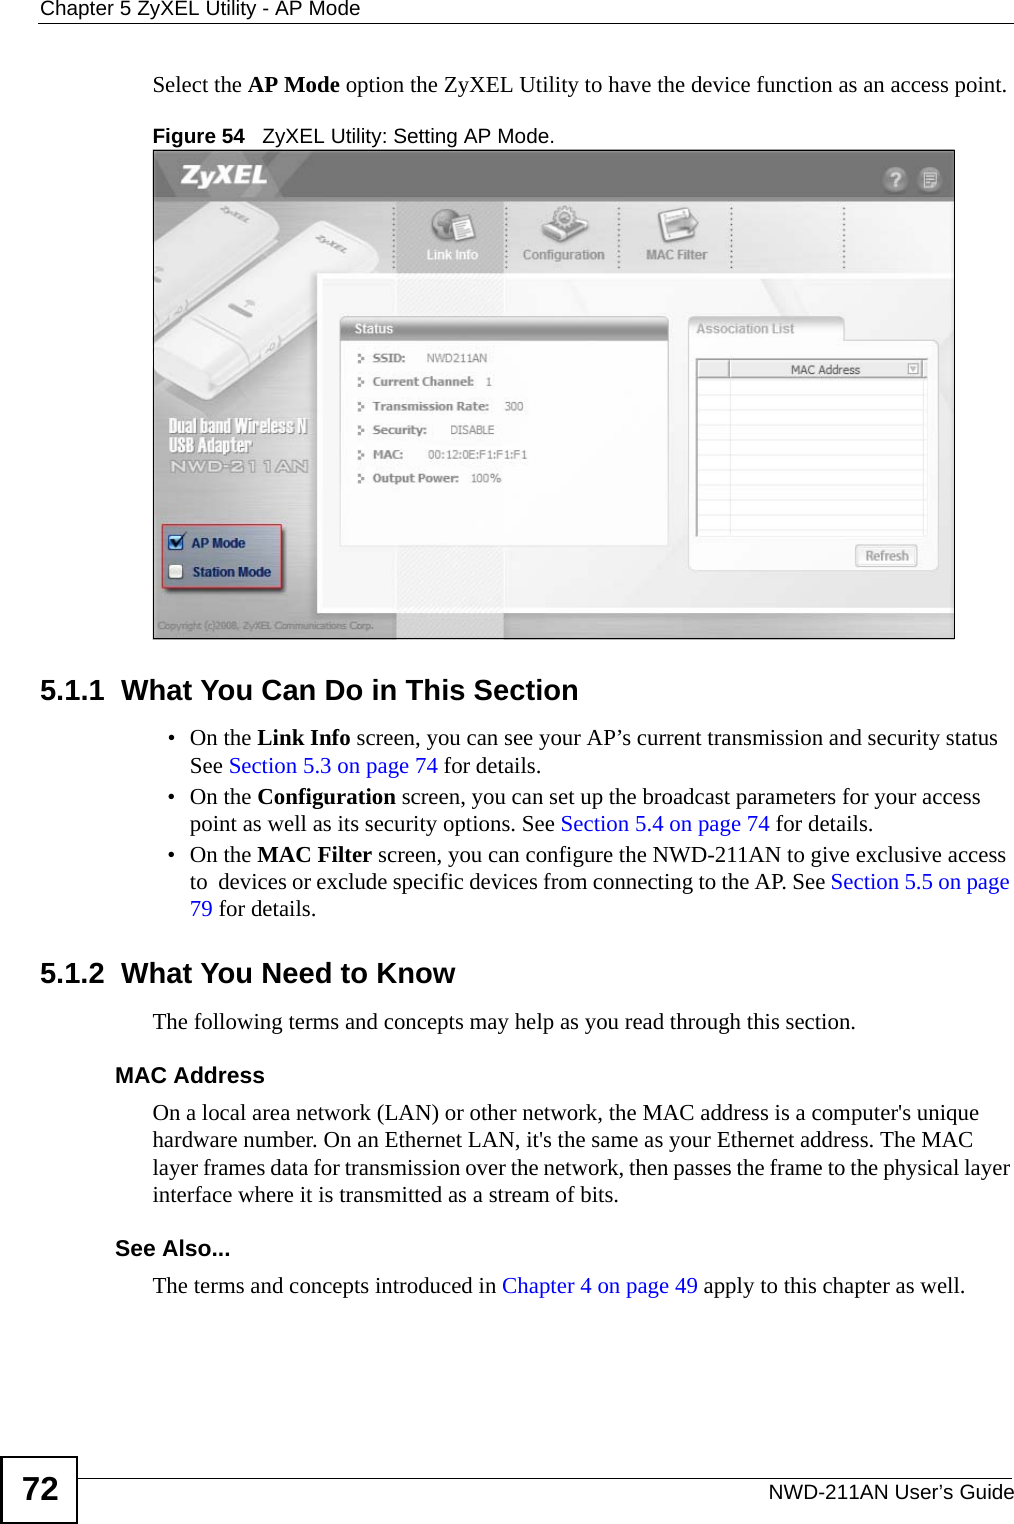 Chapter 5 ZyXEL Utility - AP ModeNWD-211AN User’s Guide72Select the AP Mode option the ZyXEL Utility to have the device function as an access point.Figure 54   ZyXEL Utility: Setting AP Mode.5.1.1  What You Can Do in This Section•On the Link Info screen, you can see your AP’s current transmission and security status See Section 5.3 on page 74 for details.•On the Configuration screen, you can set up the broadcast parameters for your access point as well as its security options. See Section 5.4 on page 74 for details.•On the MAC Filter screen, you can configure the NWD-211AN to give exclusive access to  devices or exclude specific devices from connecting to the AP. See Section 5.5 on page 79 for details.5.1.2  What You Need to KnowThe following terms and concepts may help as you read through this section.MAC AddressOn a local area network (LAN) or other network, the MAC address is a computer&apos;s unique hardware number. On an Ethernet LAN, it&apos;s the same as your Ethernet address. The MAC layer frames data for transmission over the network, then passes the frame to the physical layer interface where it is transmitted as a stream of bits.See Also...The terms and concepts introduced in Chapter 4 on page 49 apply to this chapter as well.